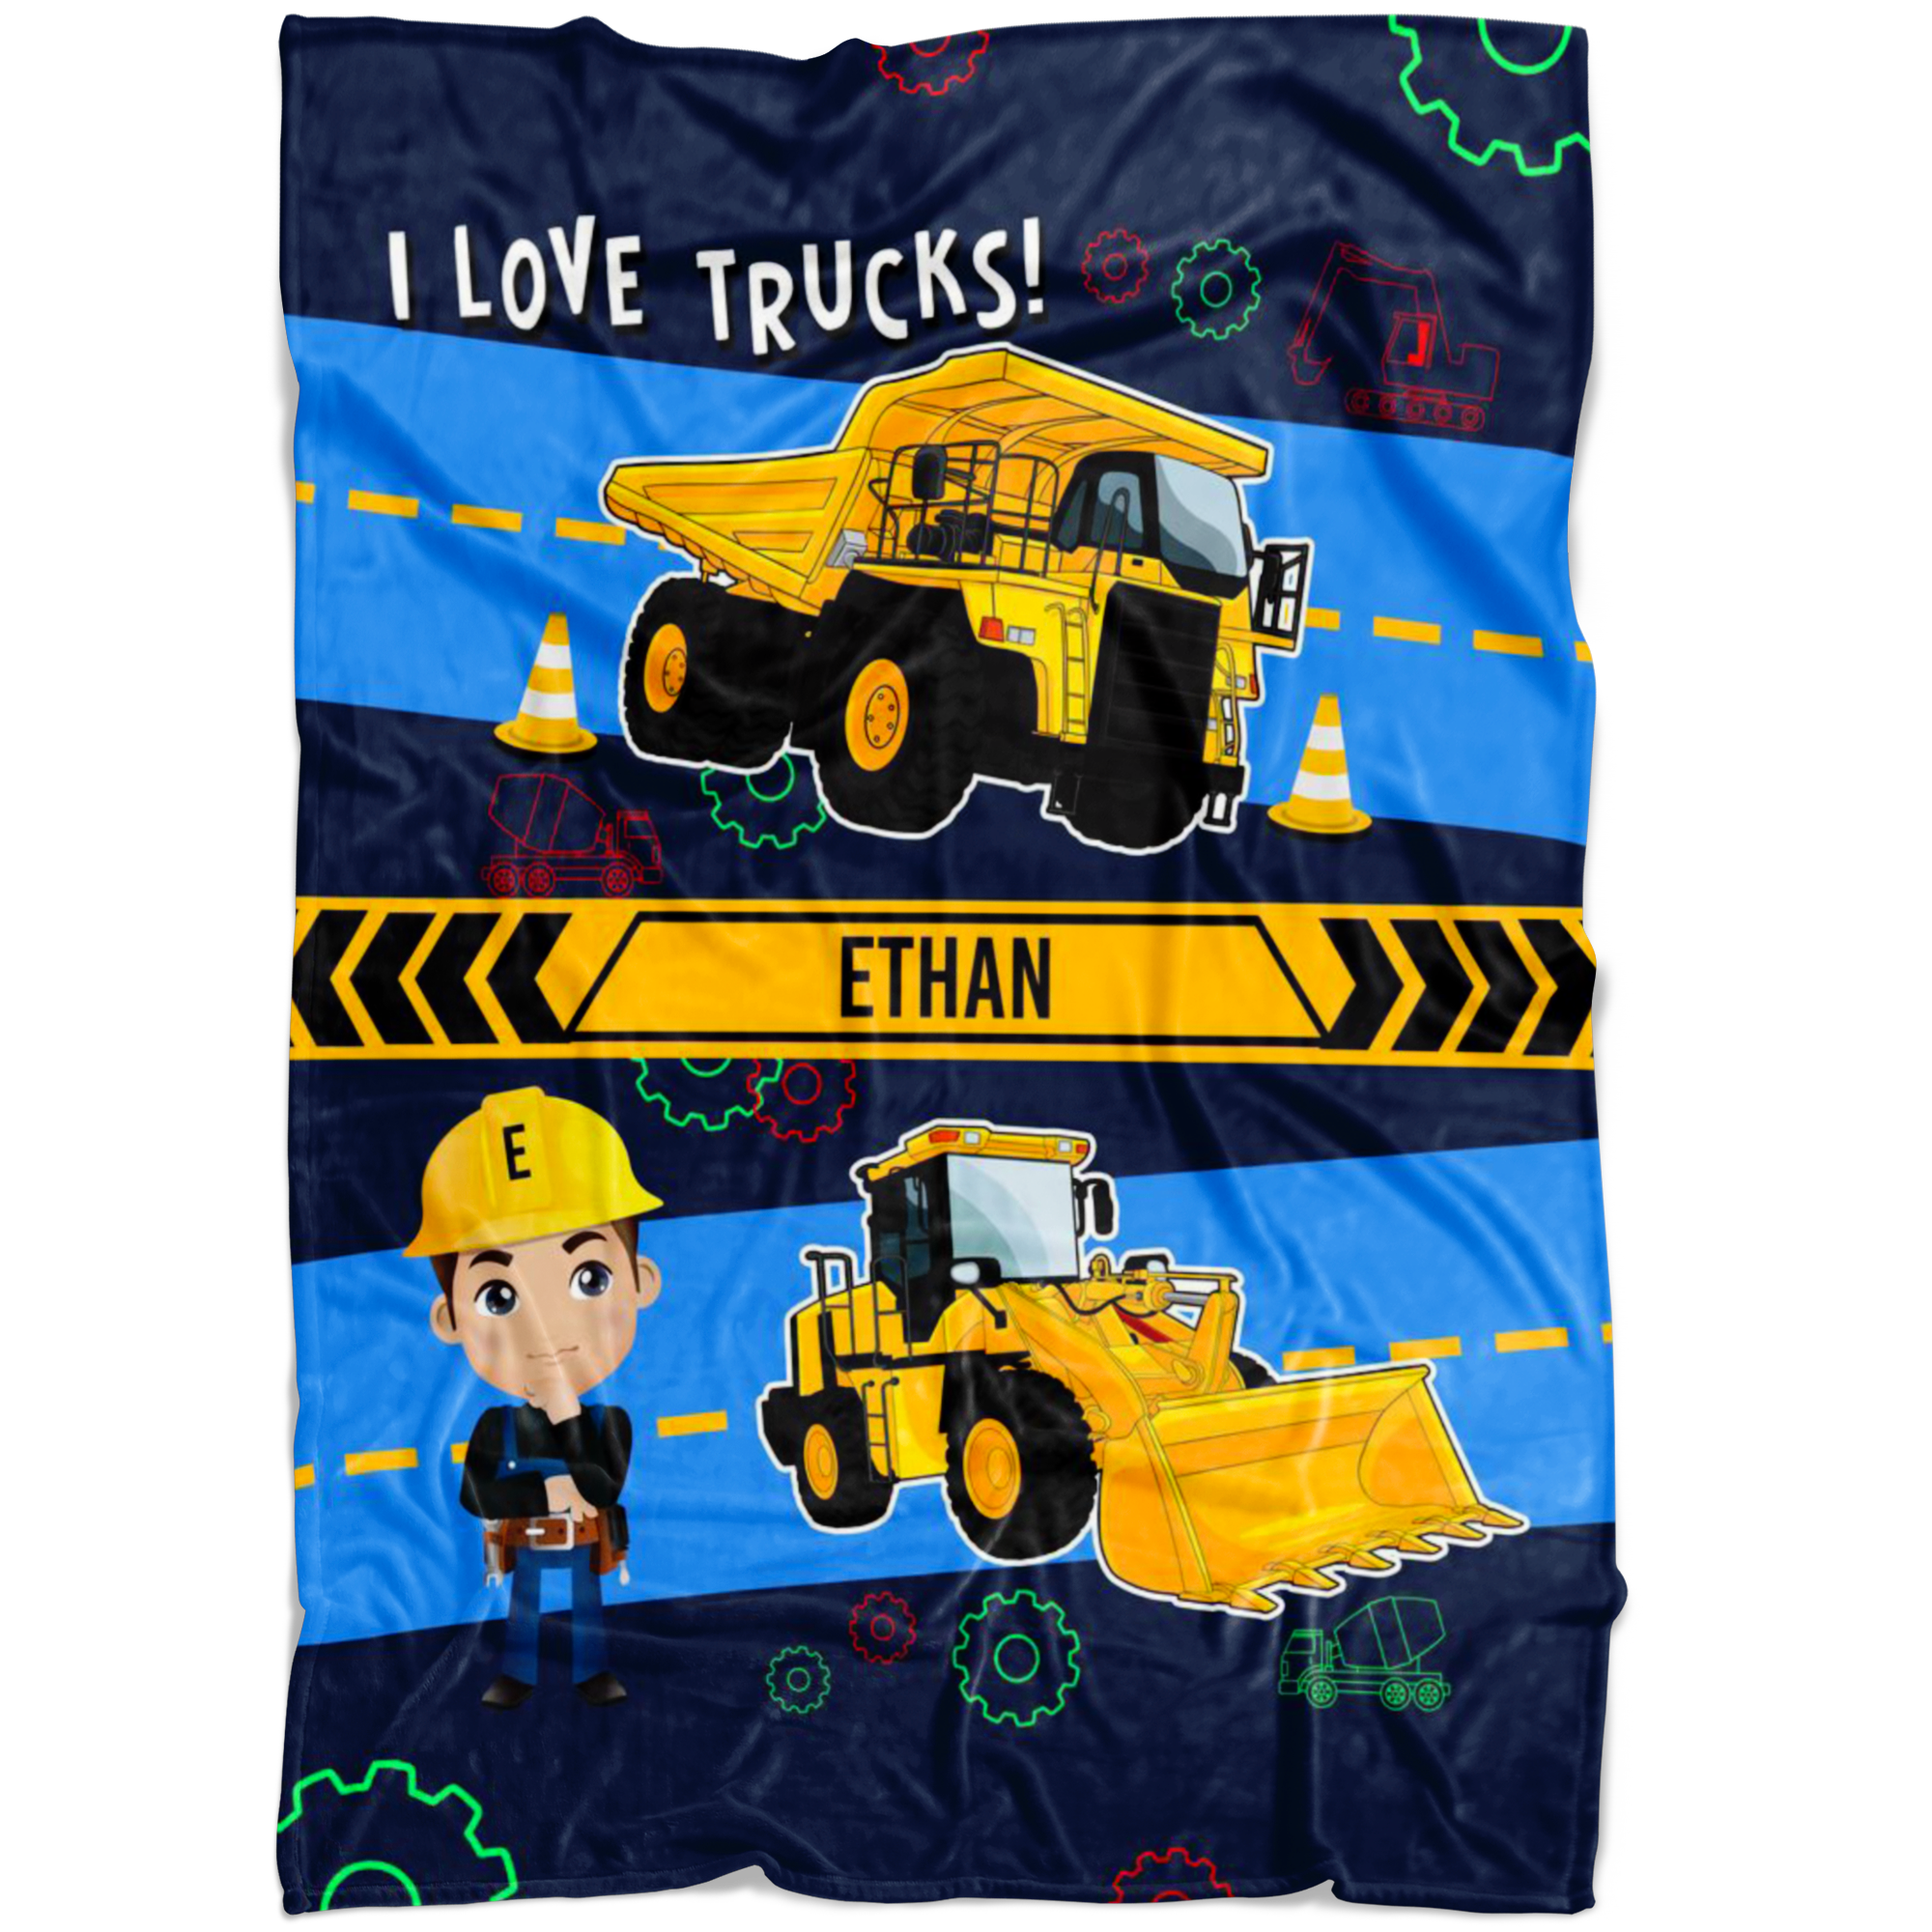 Personalized Name I Love Trucks Blanket for Boys & Girls with Character Personalization - Ethan